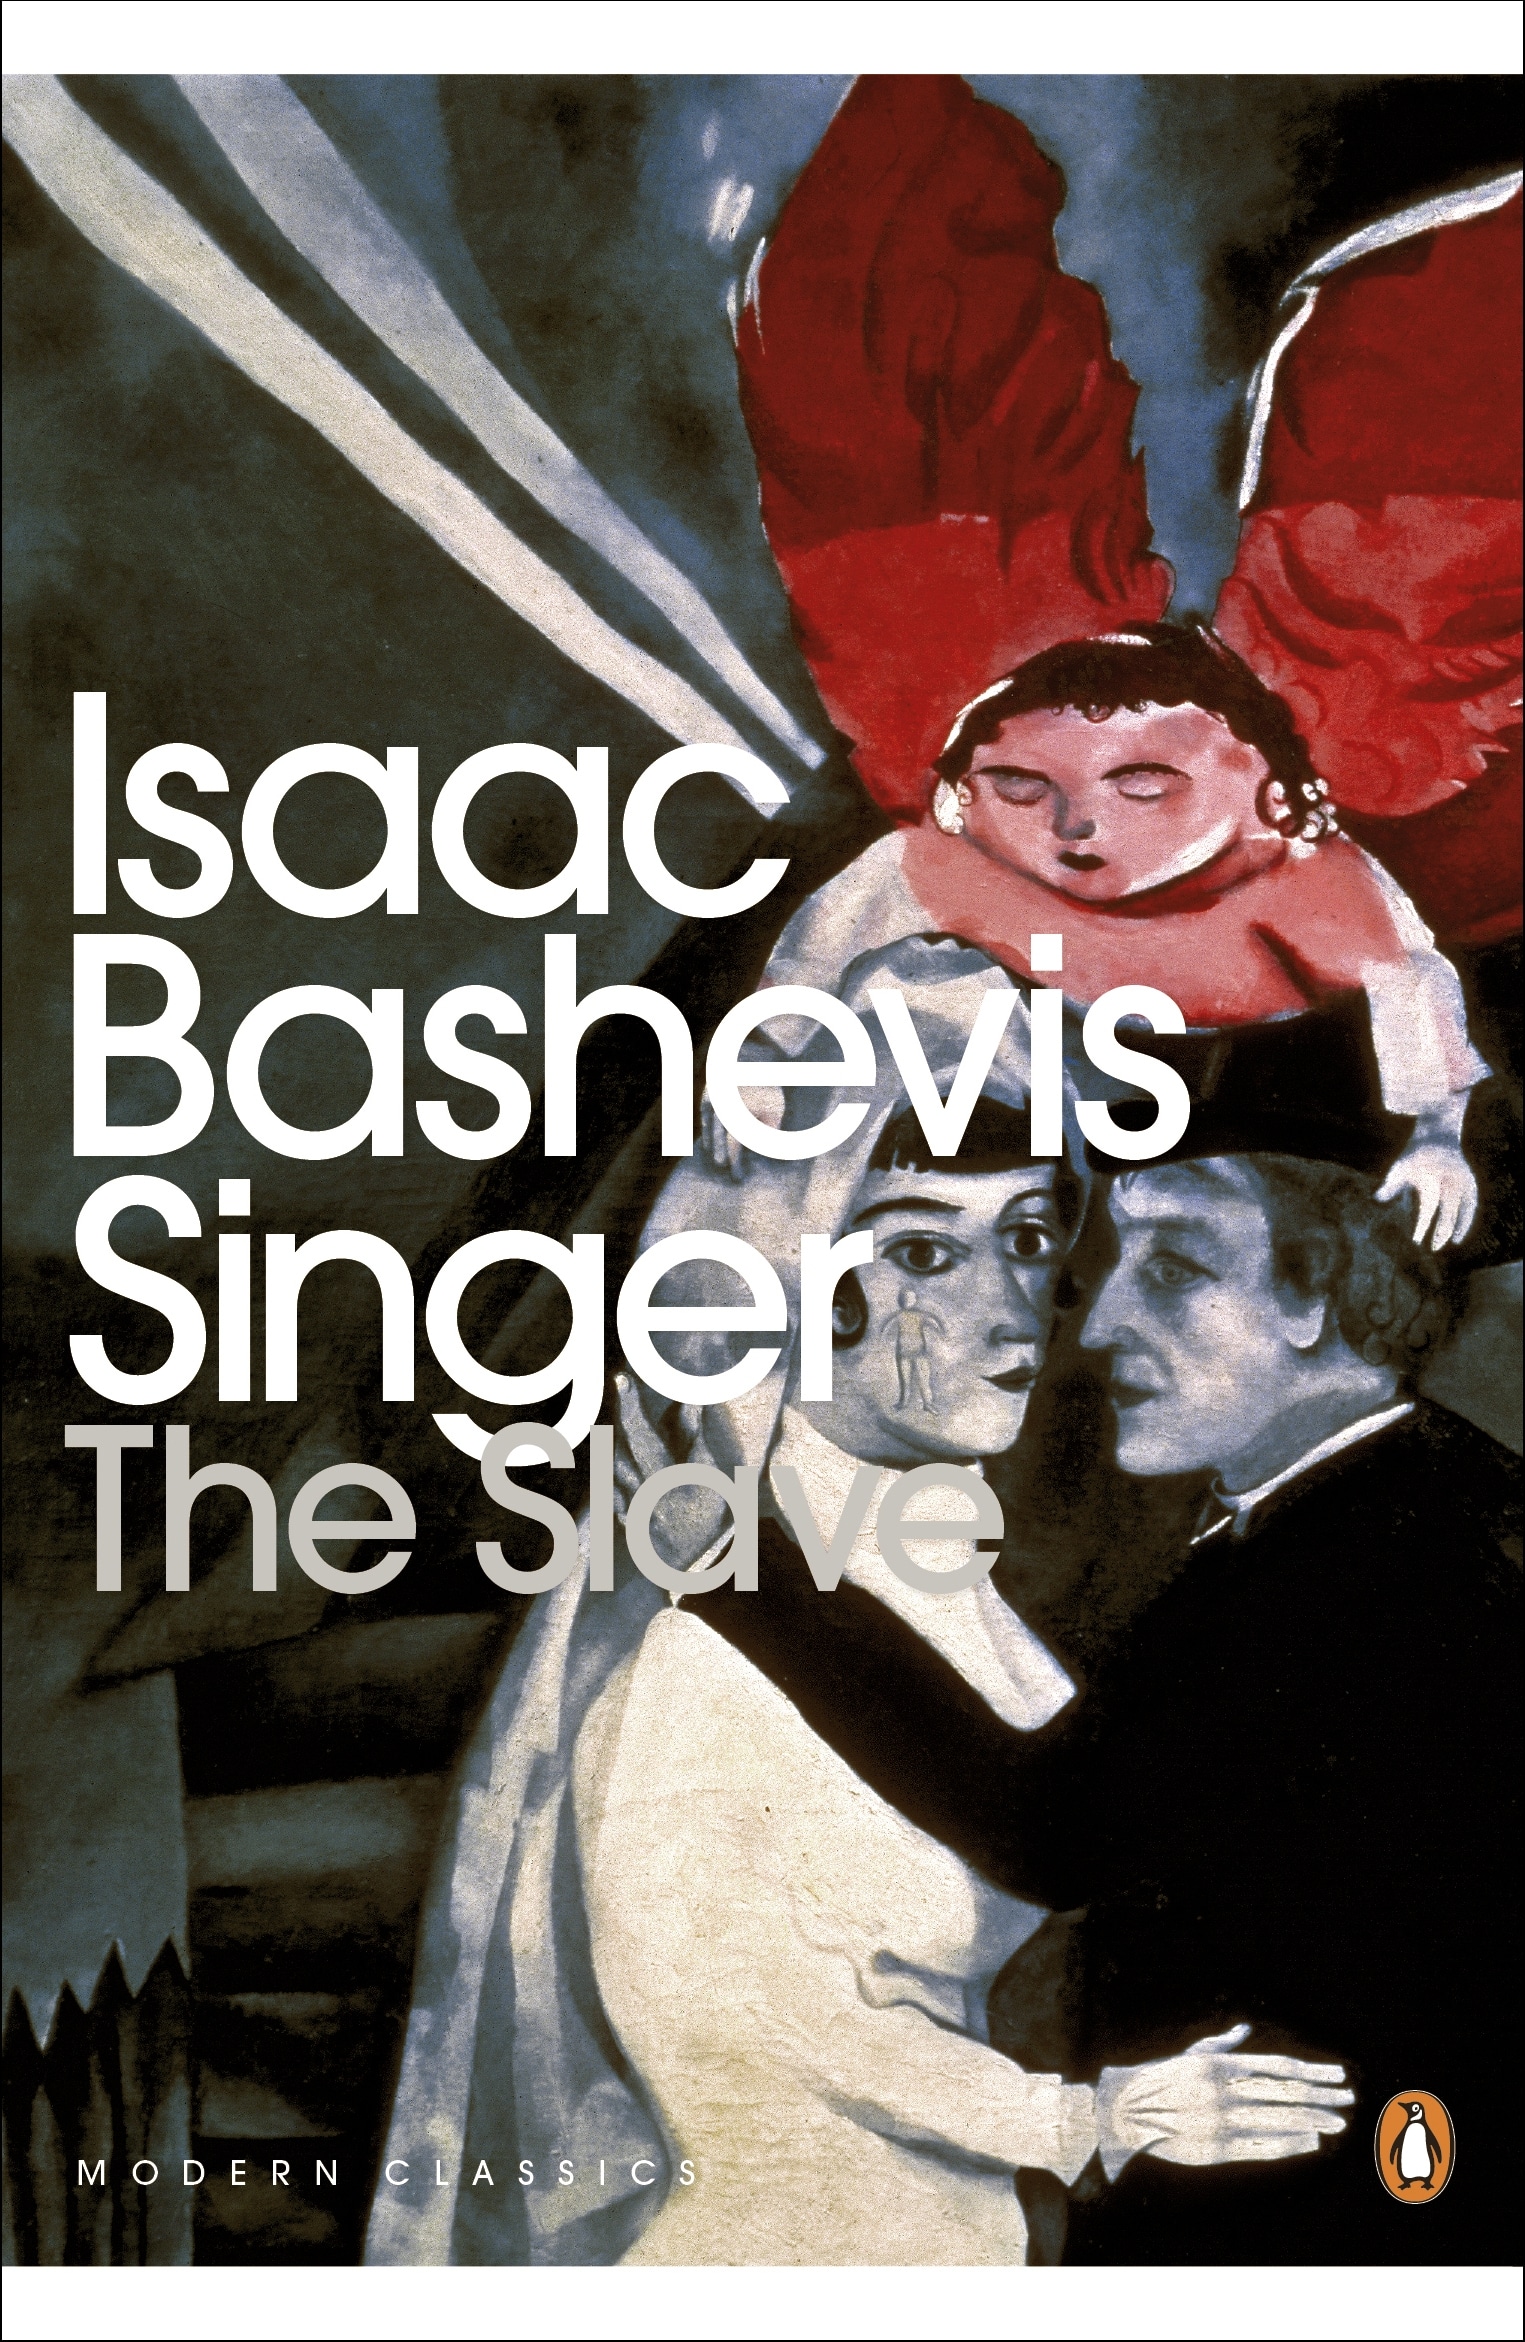 Book “The Slave” by Isaac Bashevis Singer — May 3, 2012